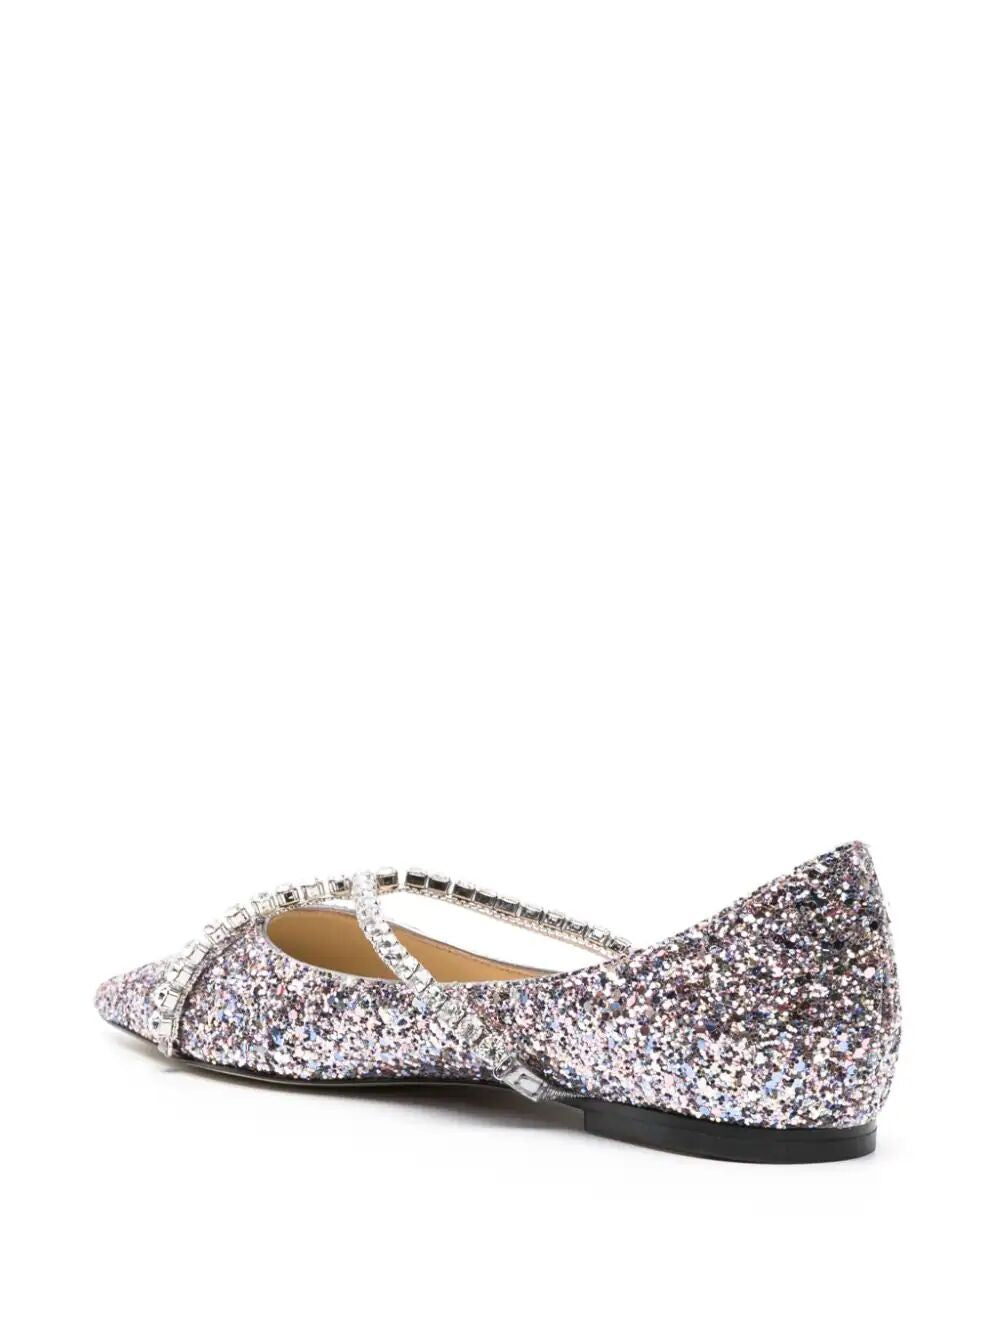 High-Quality Metallic Ballerinas for Women - Add Some Sparkle to Your Shoe Collection!